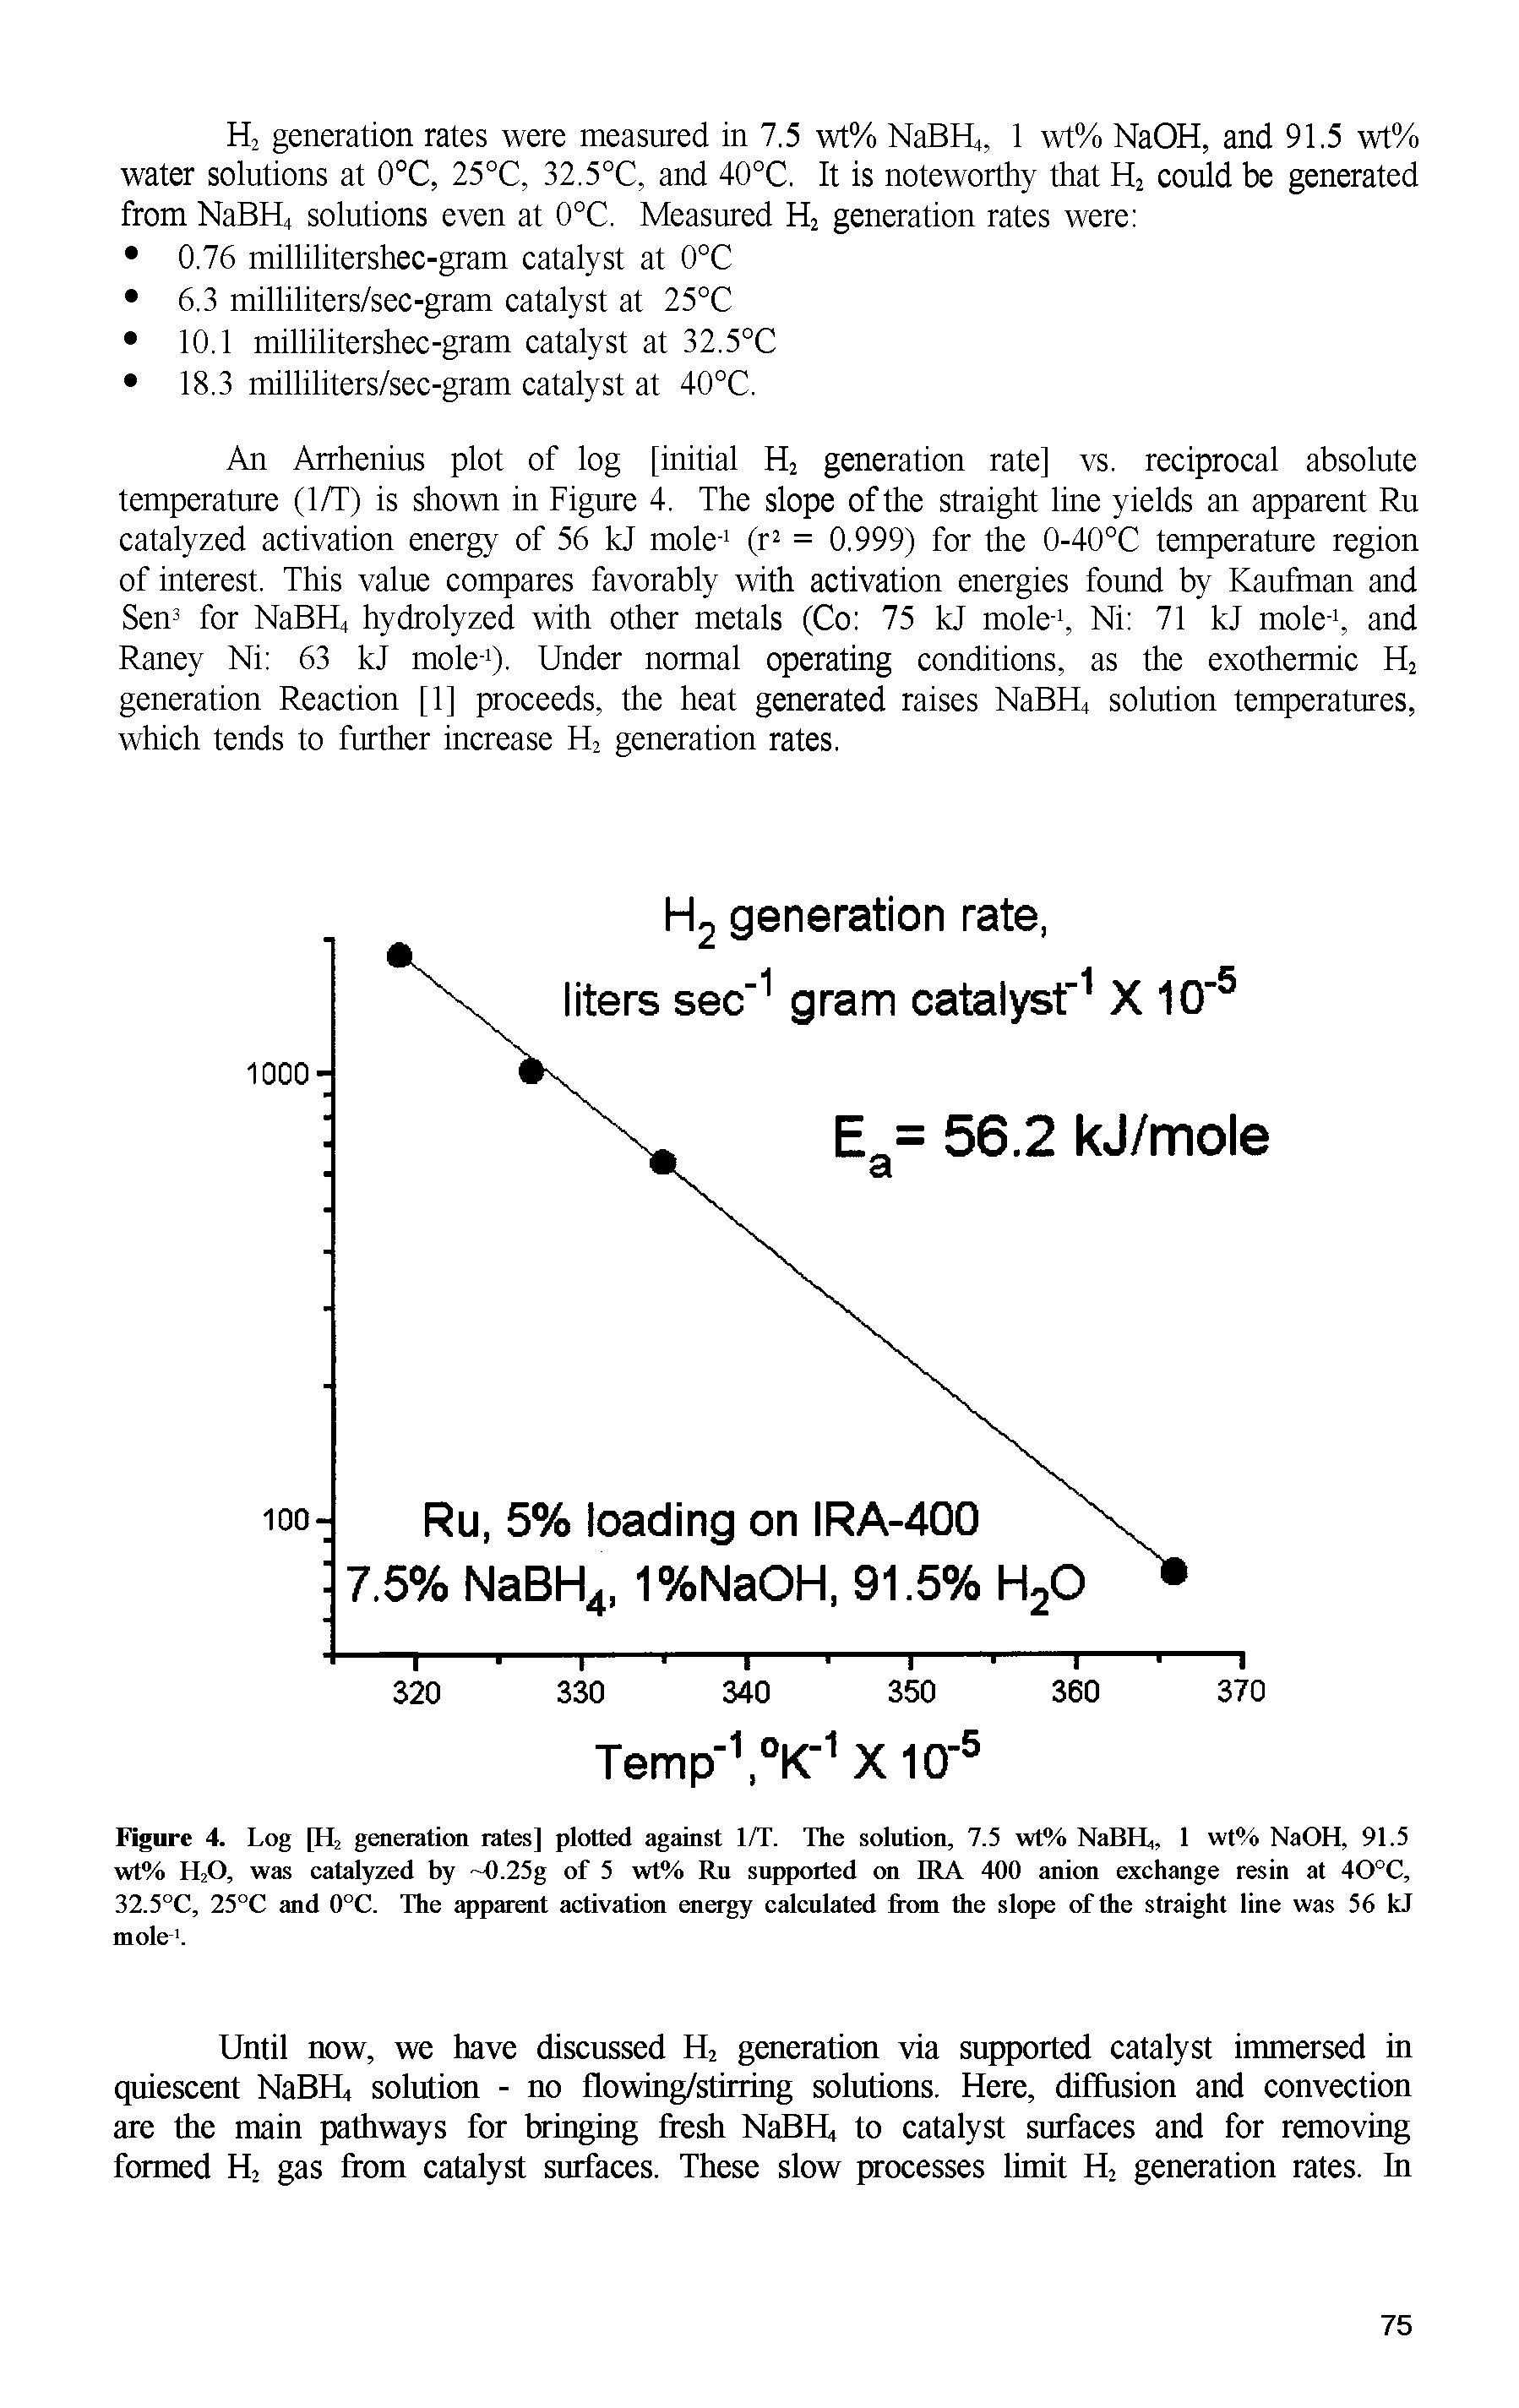 Figure 4. Log [H2 generation rates] plotted against 1/T. The solution, 7.5 wt% NaBH, 1 wt% NaOH, 91.5 wt% H20, was catalyzed by 0.25g of 5 wt% Ru supported on IRA 400 anion exchange resin at 40°C, 32.5°C, 25°C and 0°C. The apparent activation energy calculated from the slope of the straight line was 56 kJ mole-1.